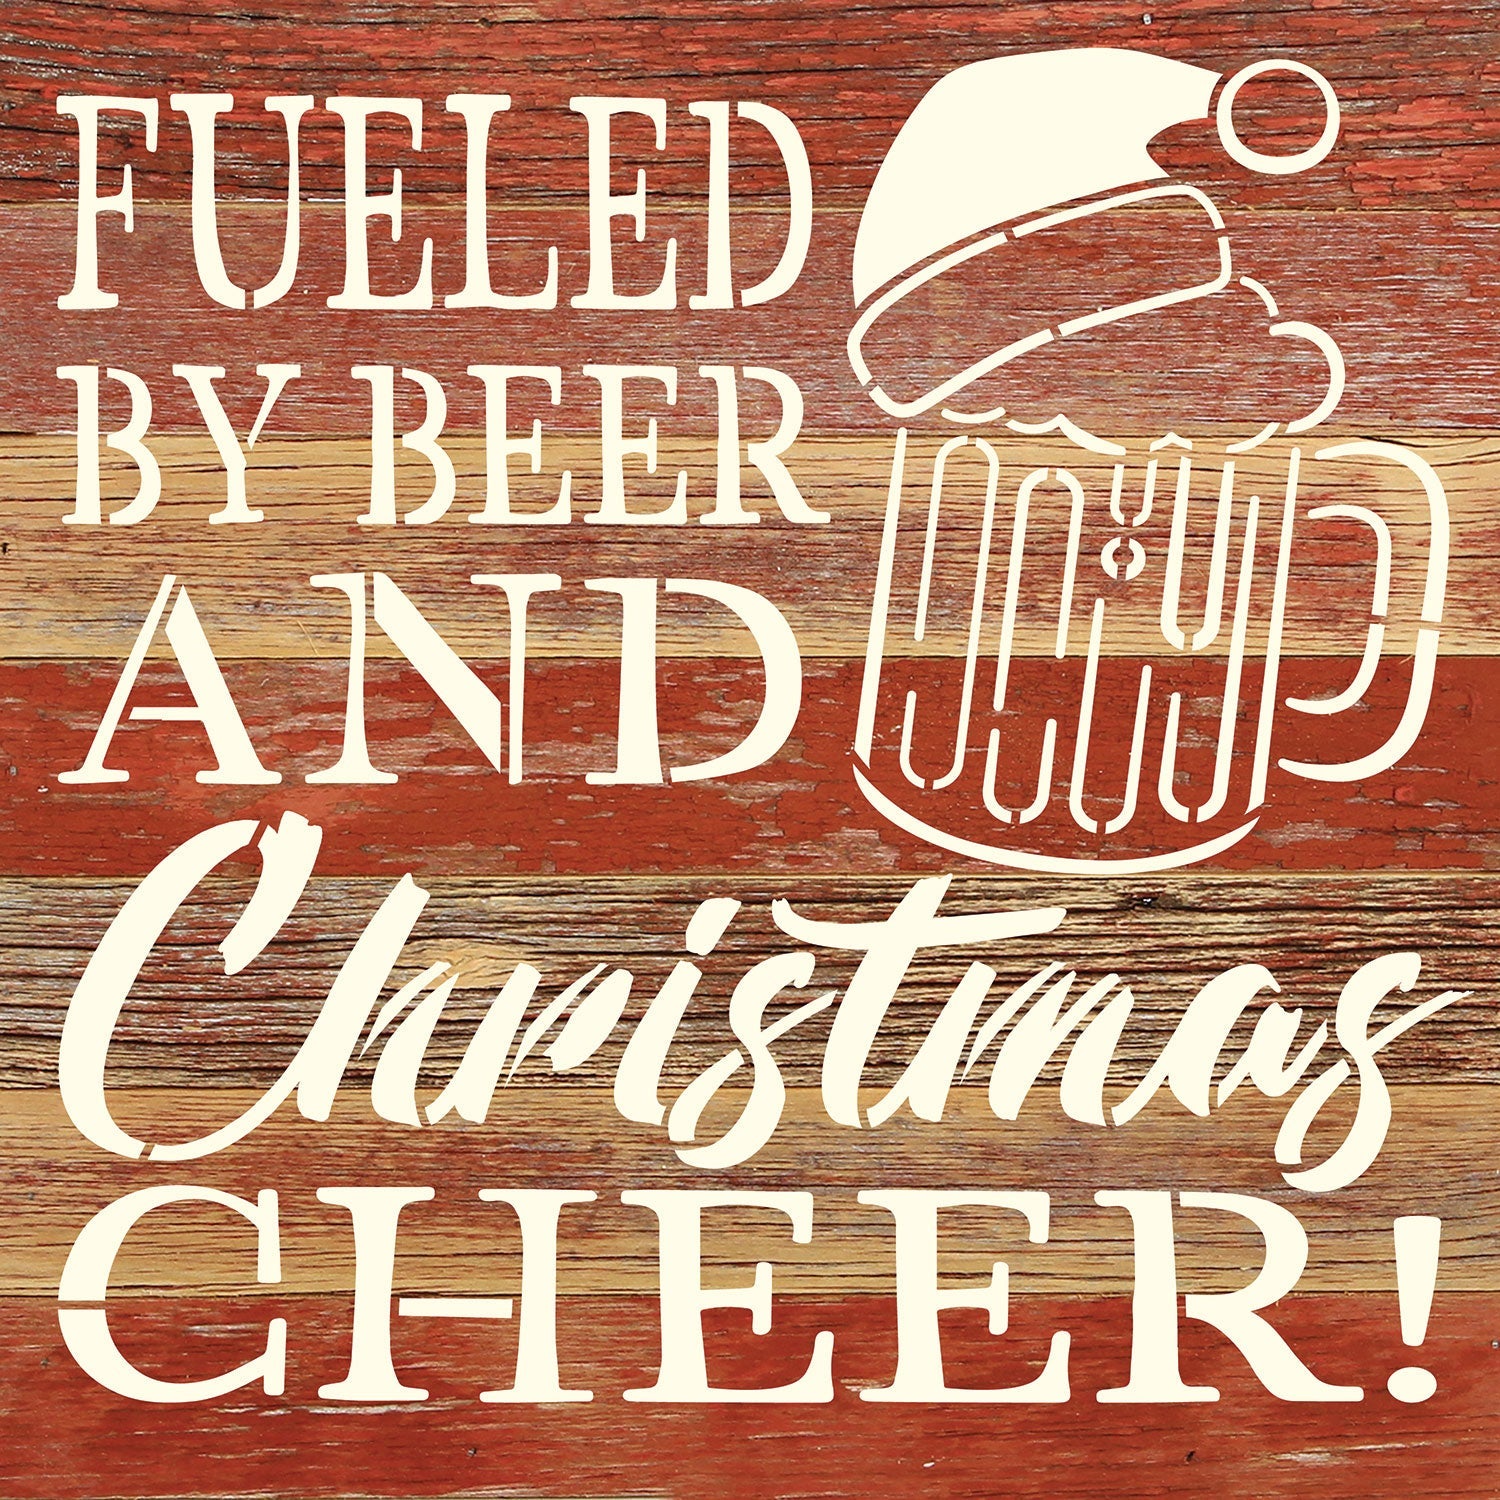 Fueled by Beer and Christmas Cheer / 10x10 Reclaimed Wood Wall Decor